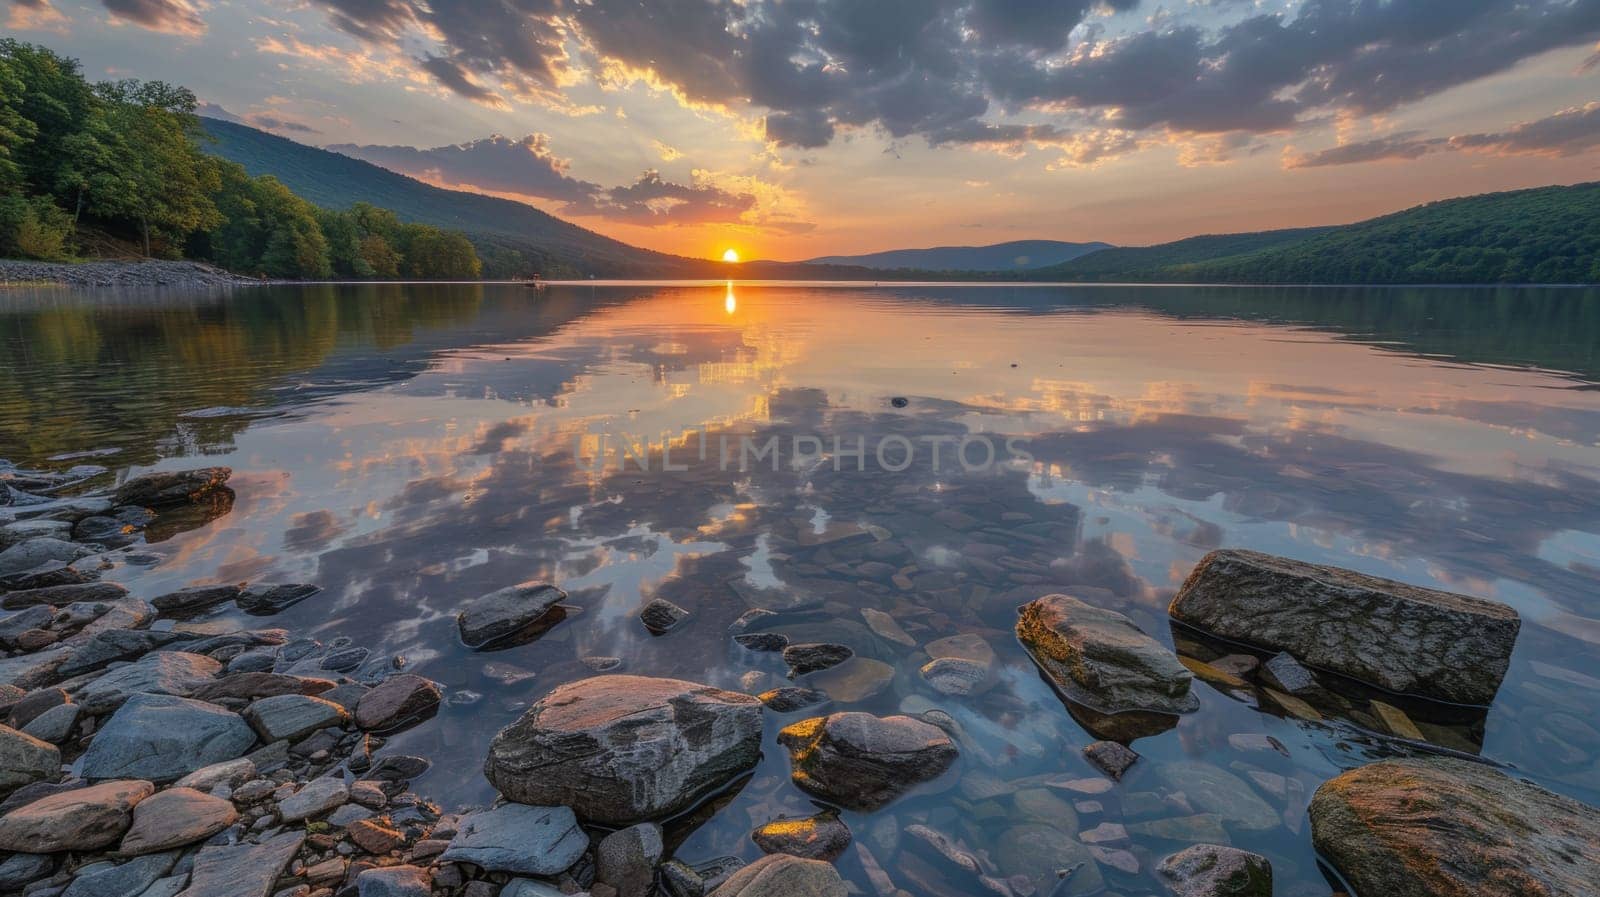 A sunset over a lake with rocks and trees in the background, AI by starush